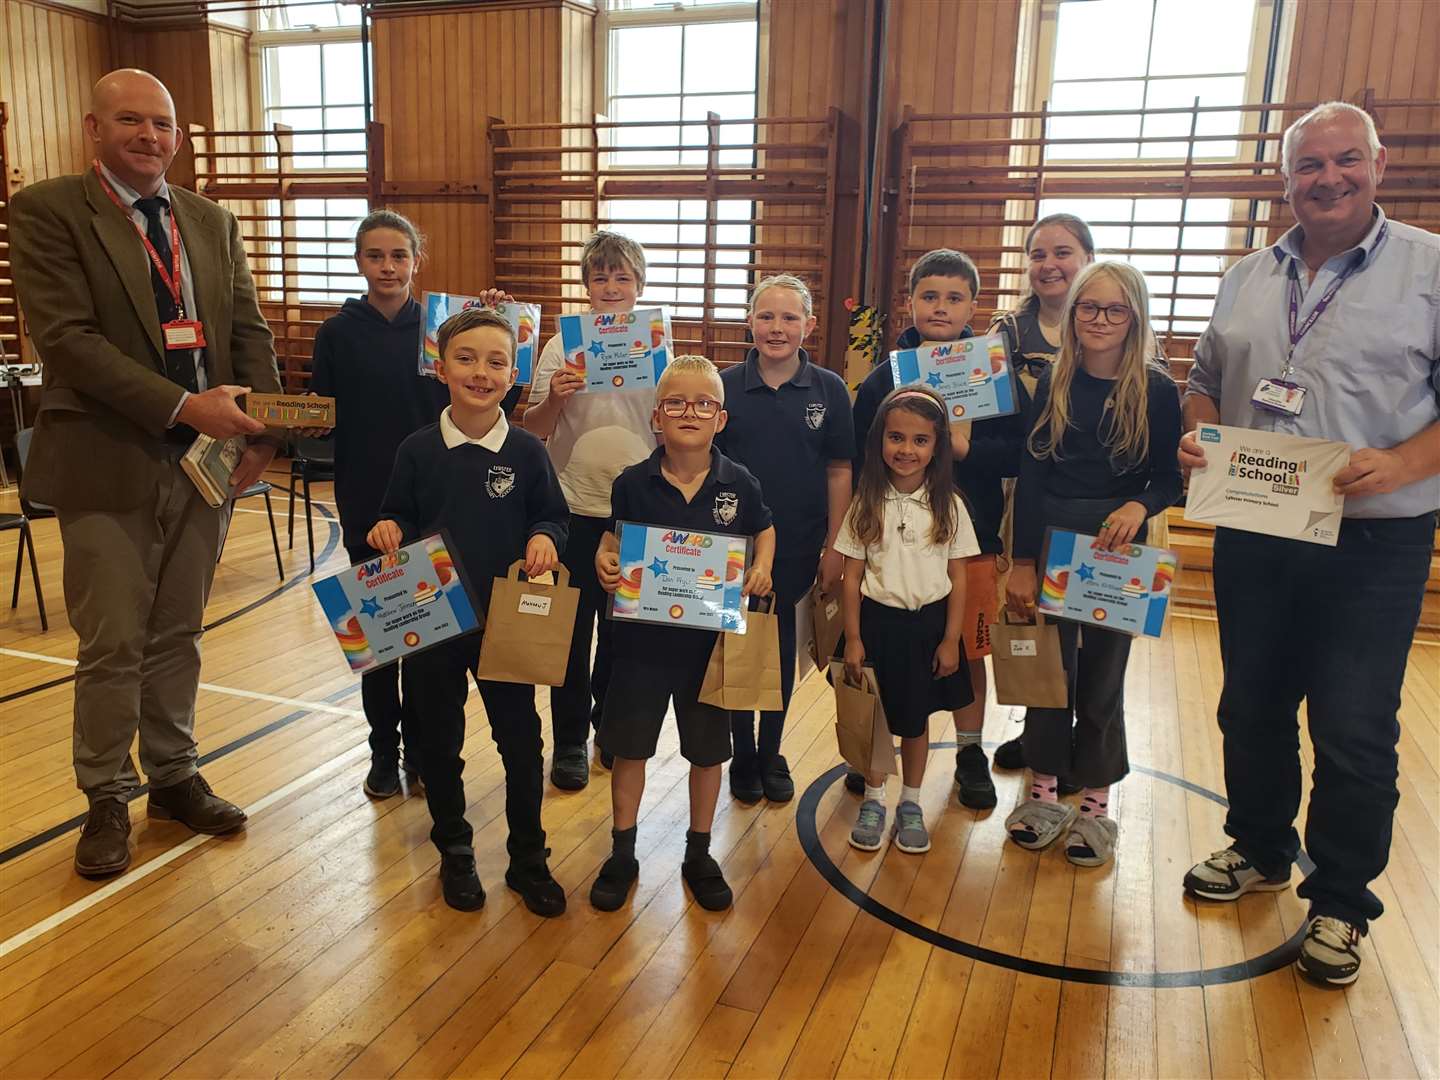 Anson Macauslan (left) of the Lord-Lieutenant's office and (right) Councillor Raymond Bremner with members of Lybster Primary's Reading Leadership Group (back, from left) Lucy Dimes, Ryan Miller, Ailsa Chisholm, Innes Black, teacher Judith Crow, Zara Kirkham; (front) Matthew Johnson, Dan Fryer and Josselin Sutherland.